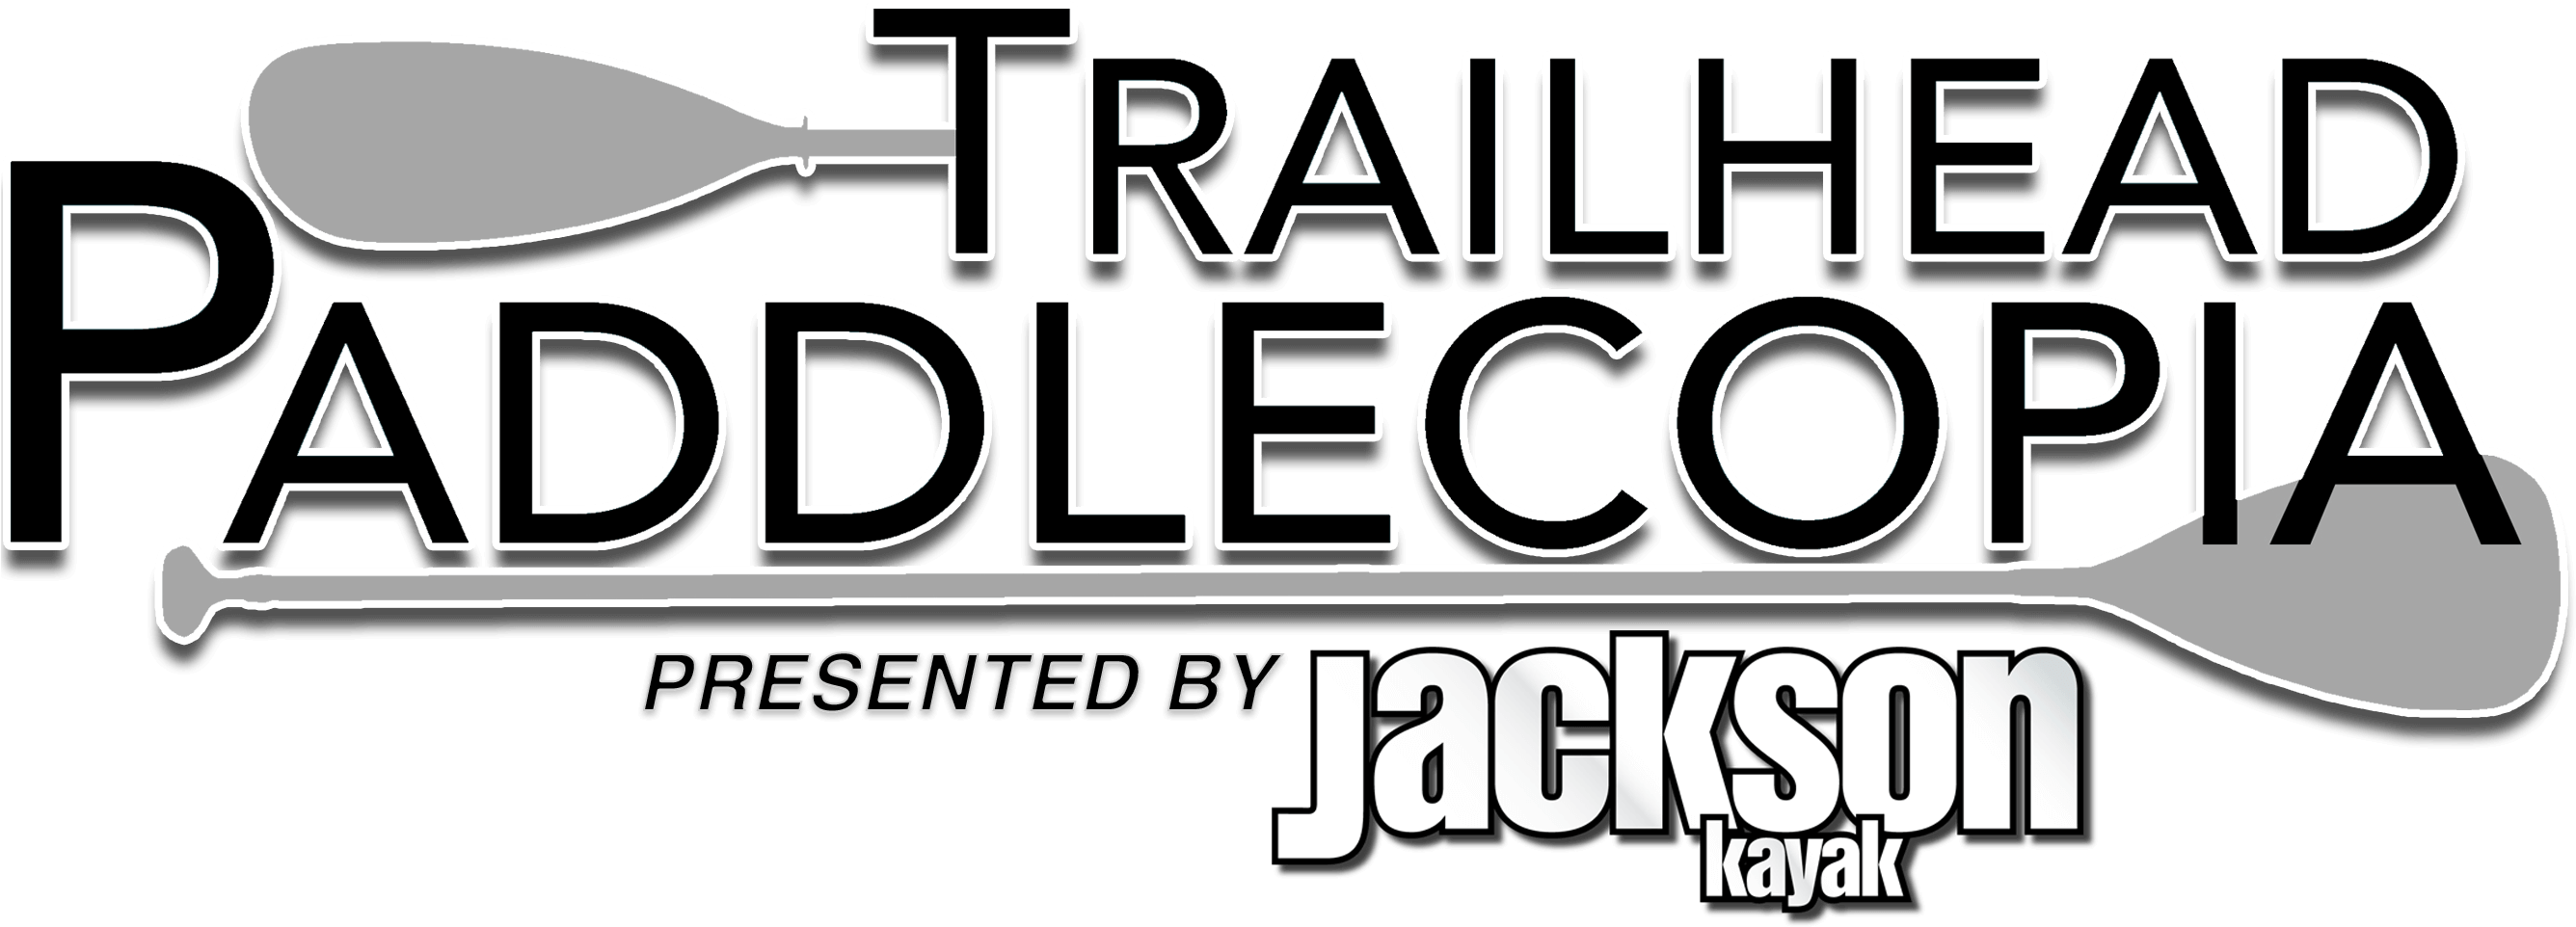 This Year Paddlecopia's Title Sponsor Is Jackson Kayaks - Trailhead Paddle Shack (2687x964), Png Download